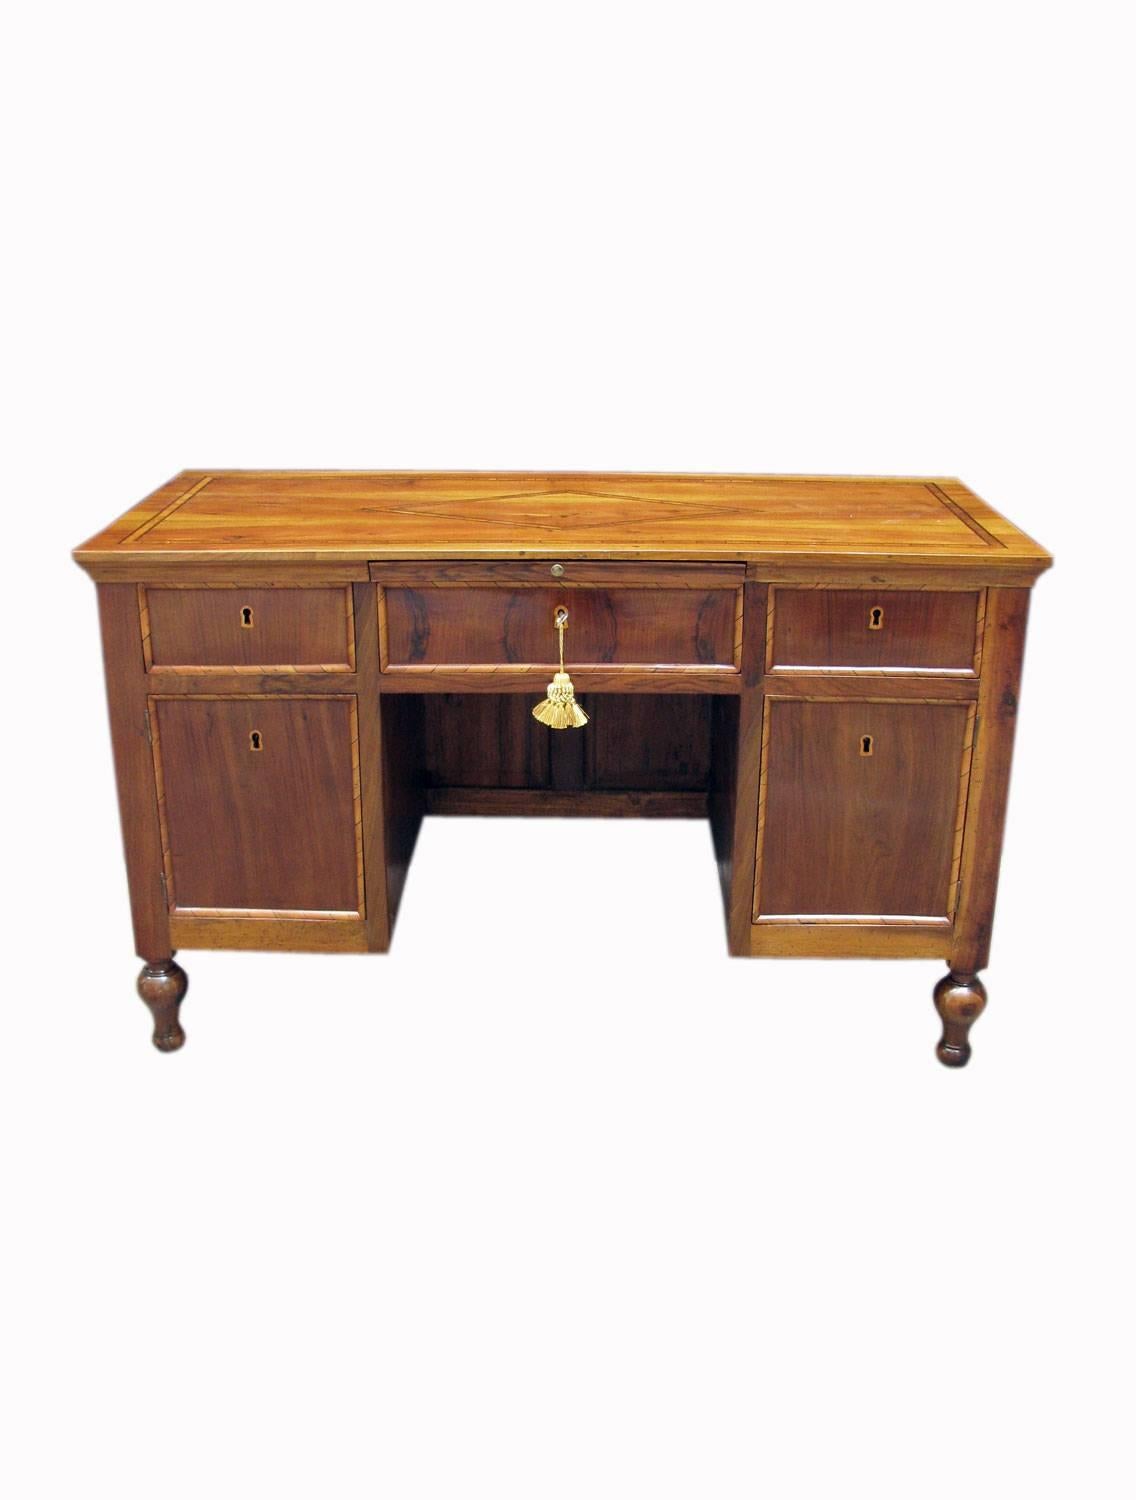 Mid-19th century Italian walnut writing table, knee hole desk with three drawers, and two doors. Solid walnut top, centered by elegant geometric inlay marquetry; front, sides and back are walnut veneered, decorated with spectacular molding frames,